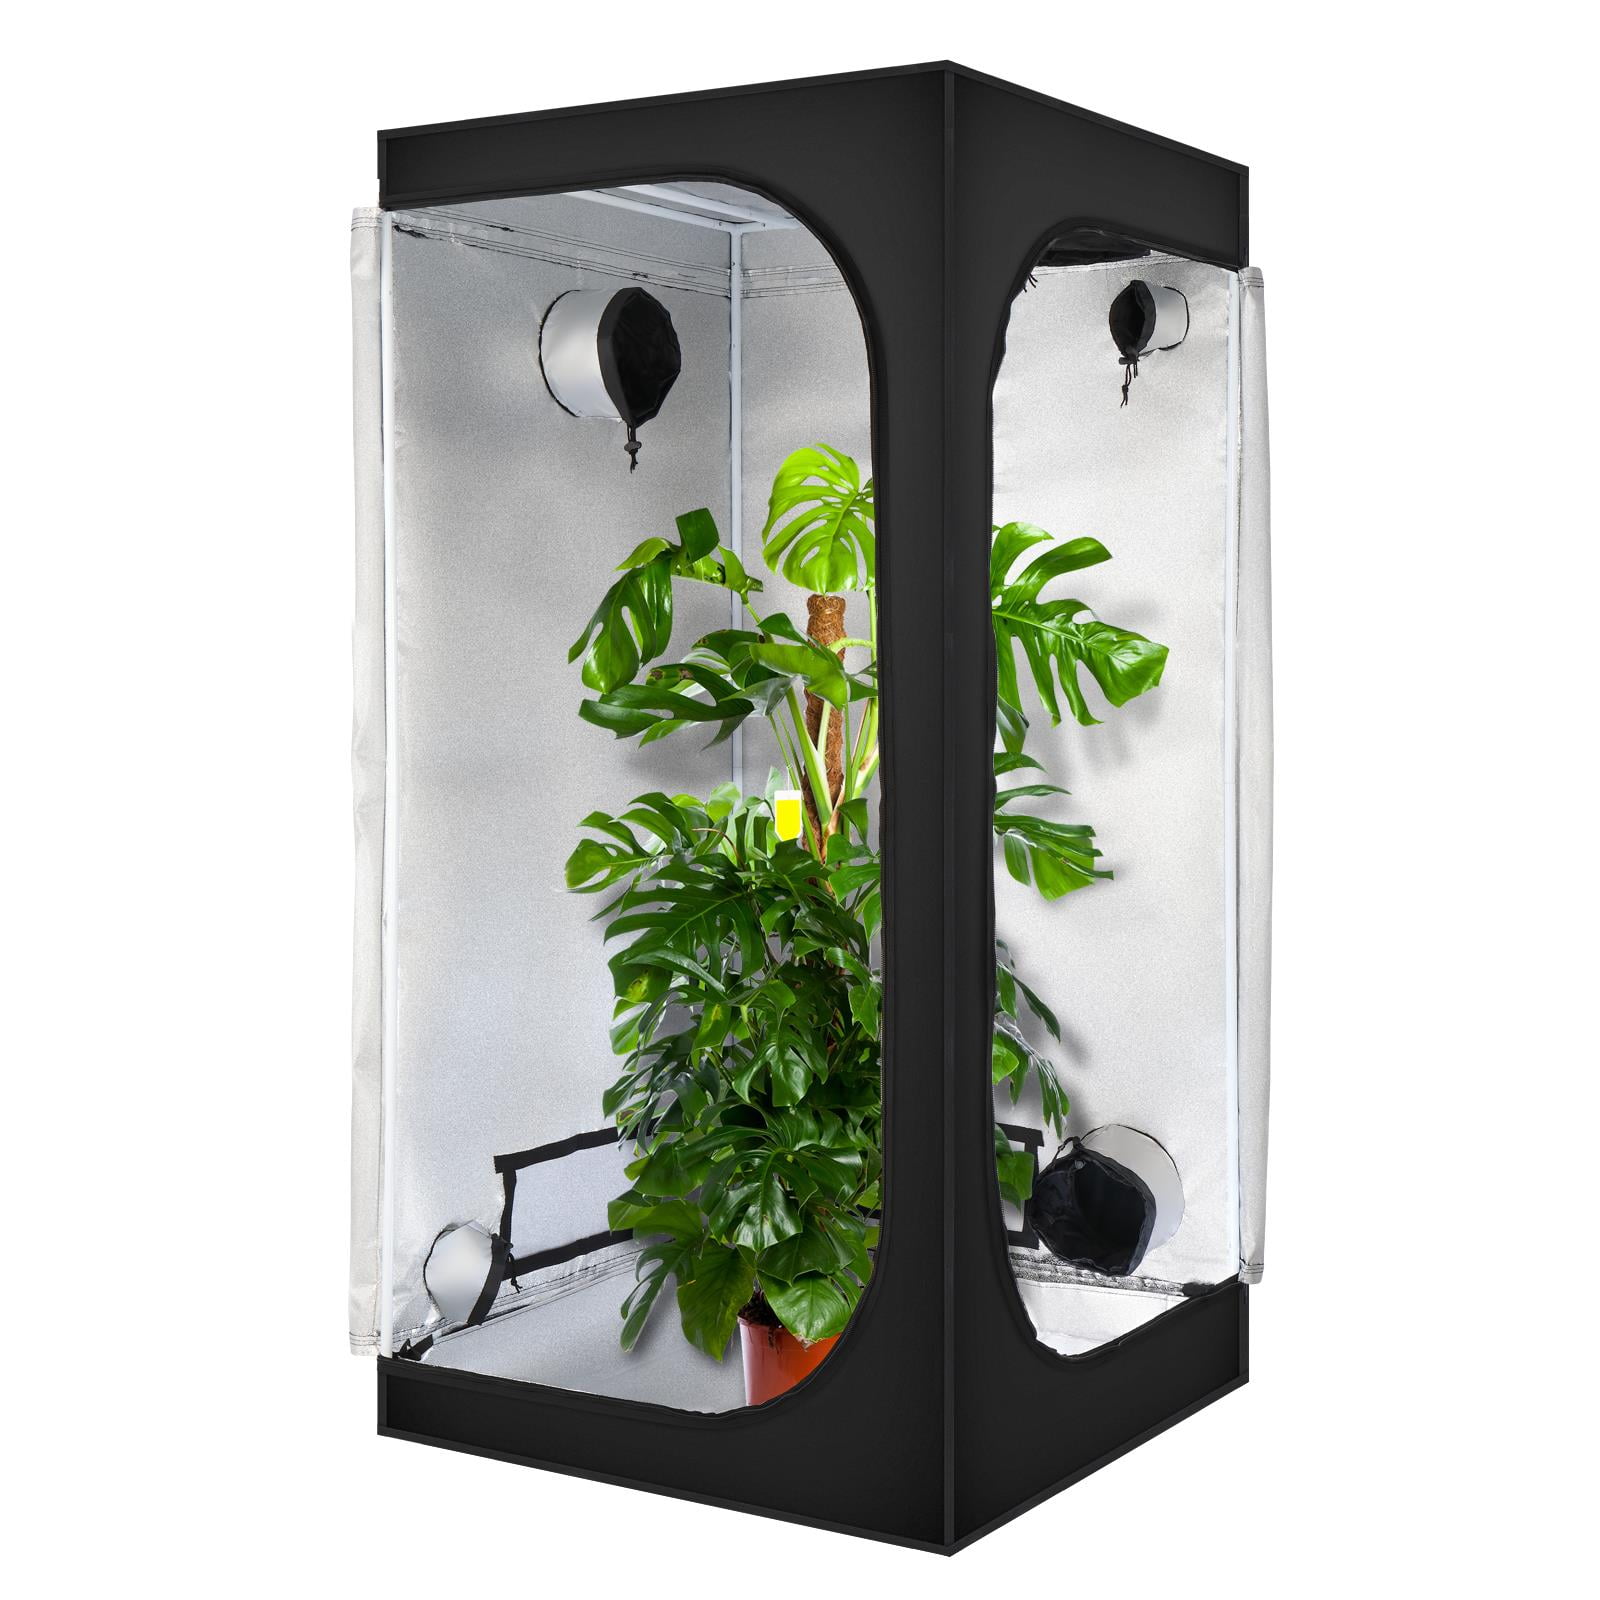 Details about   VIVOSUN 36"x36"x72" Mylar Grow Tent Hydroponic Indooor Plant Growing 600D Oxford 